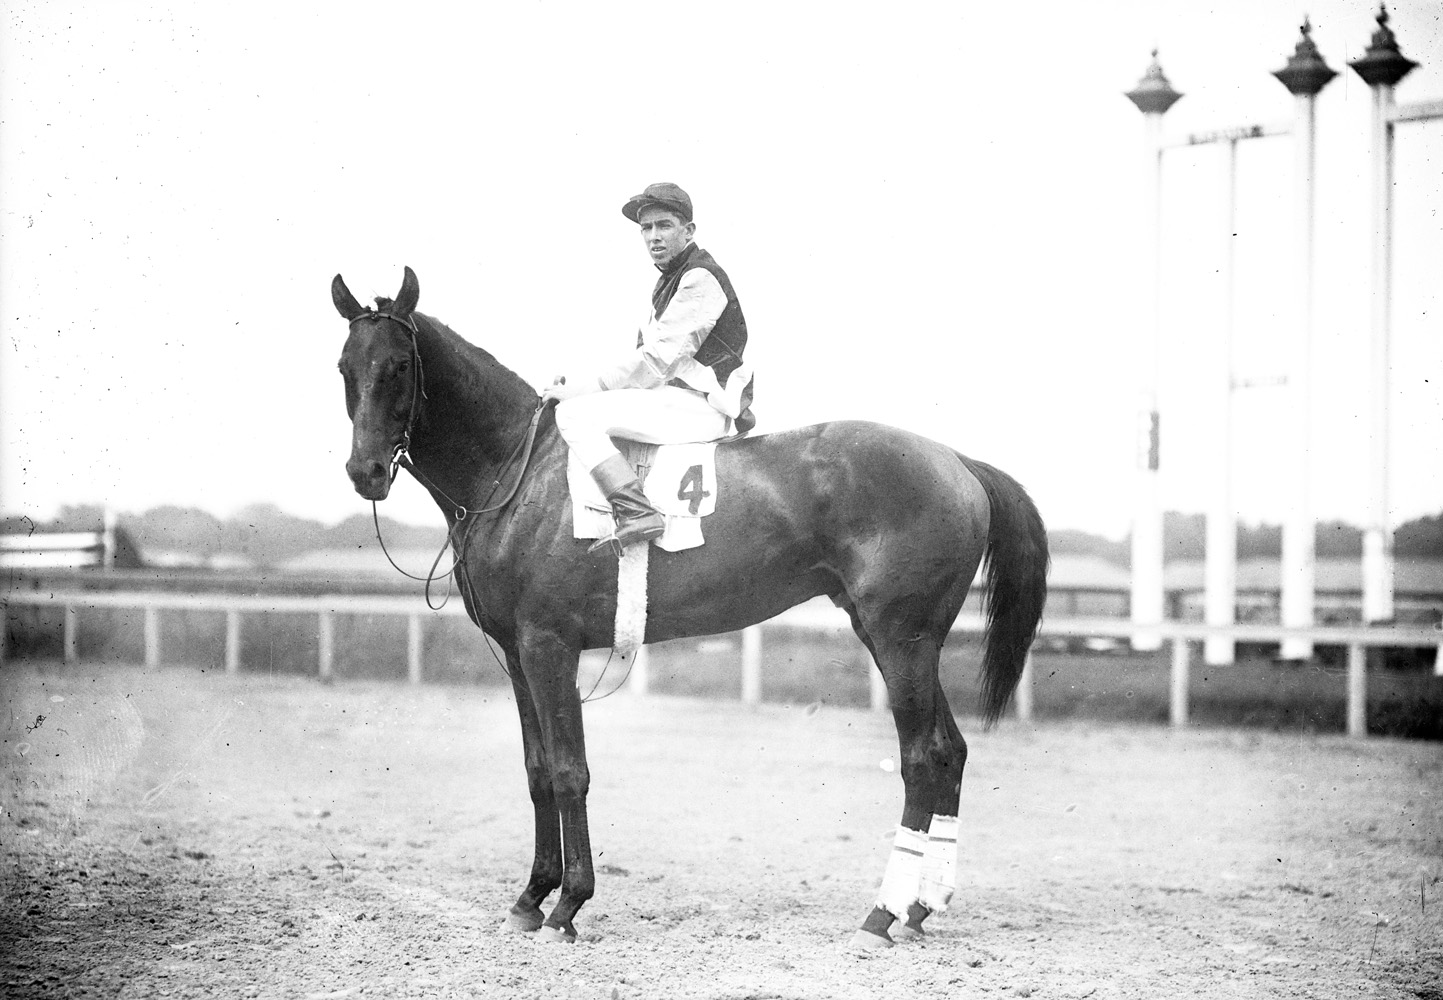 Carroll Shilling and Dalmatian (Keeneland Library Cook Collection)